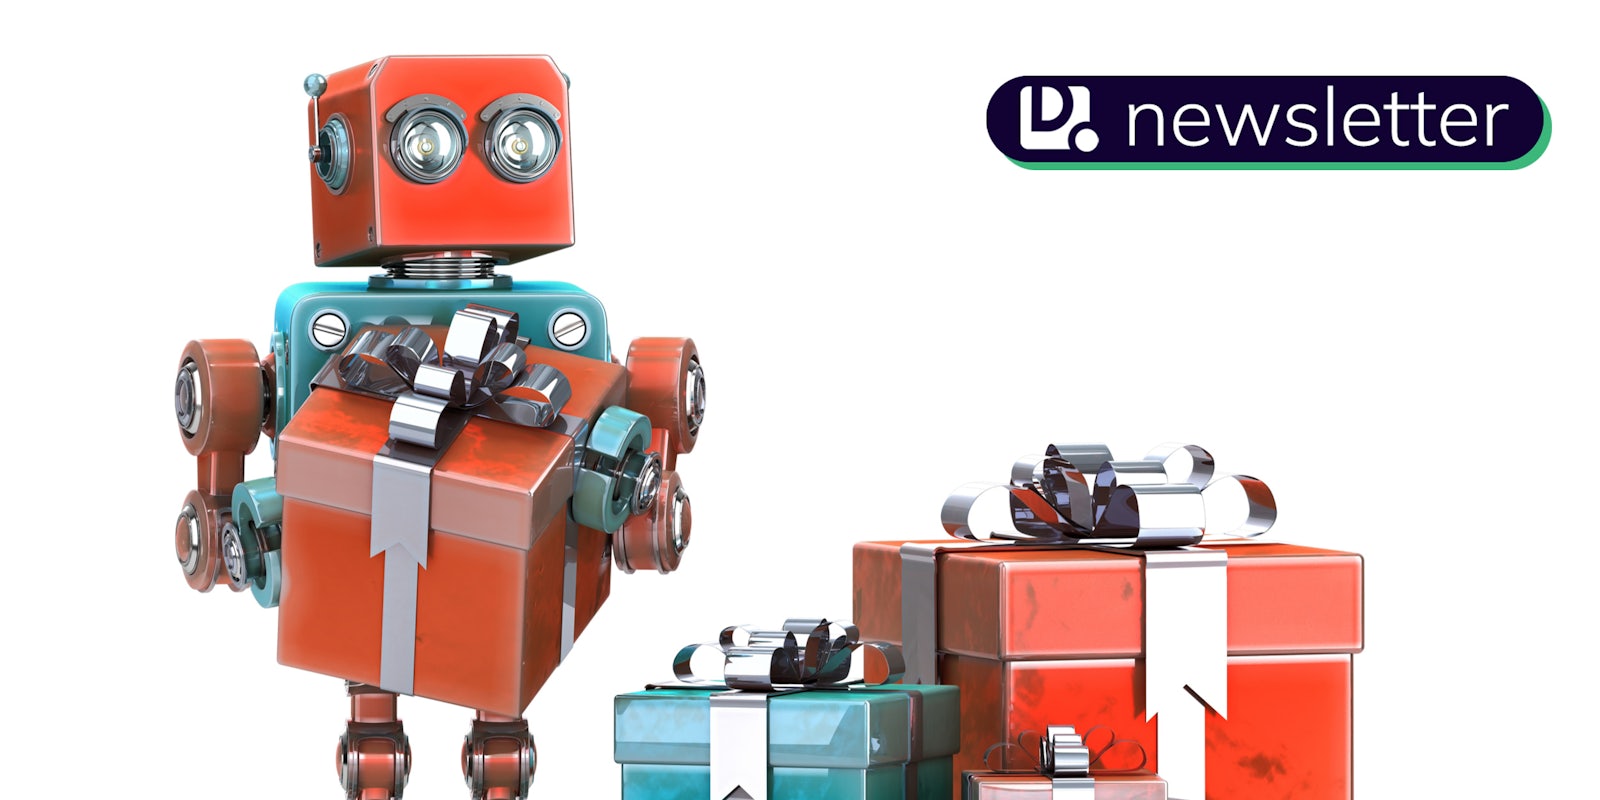 A robot holding a birthday present. The Daily Dot newsletter logo is in the top right corner.